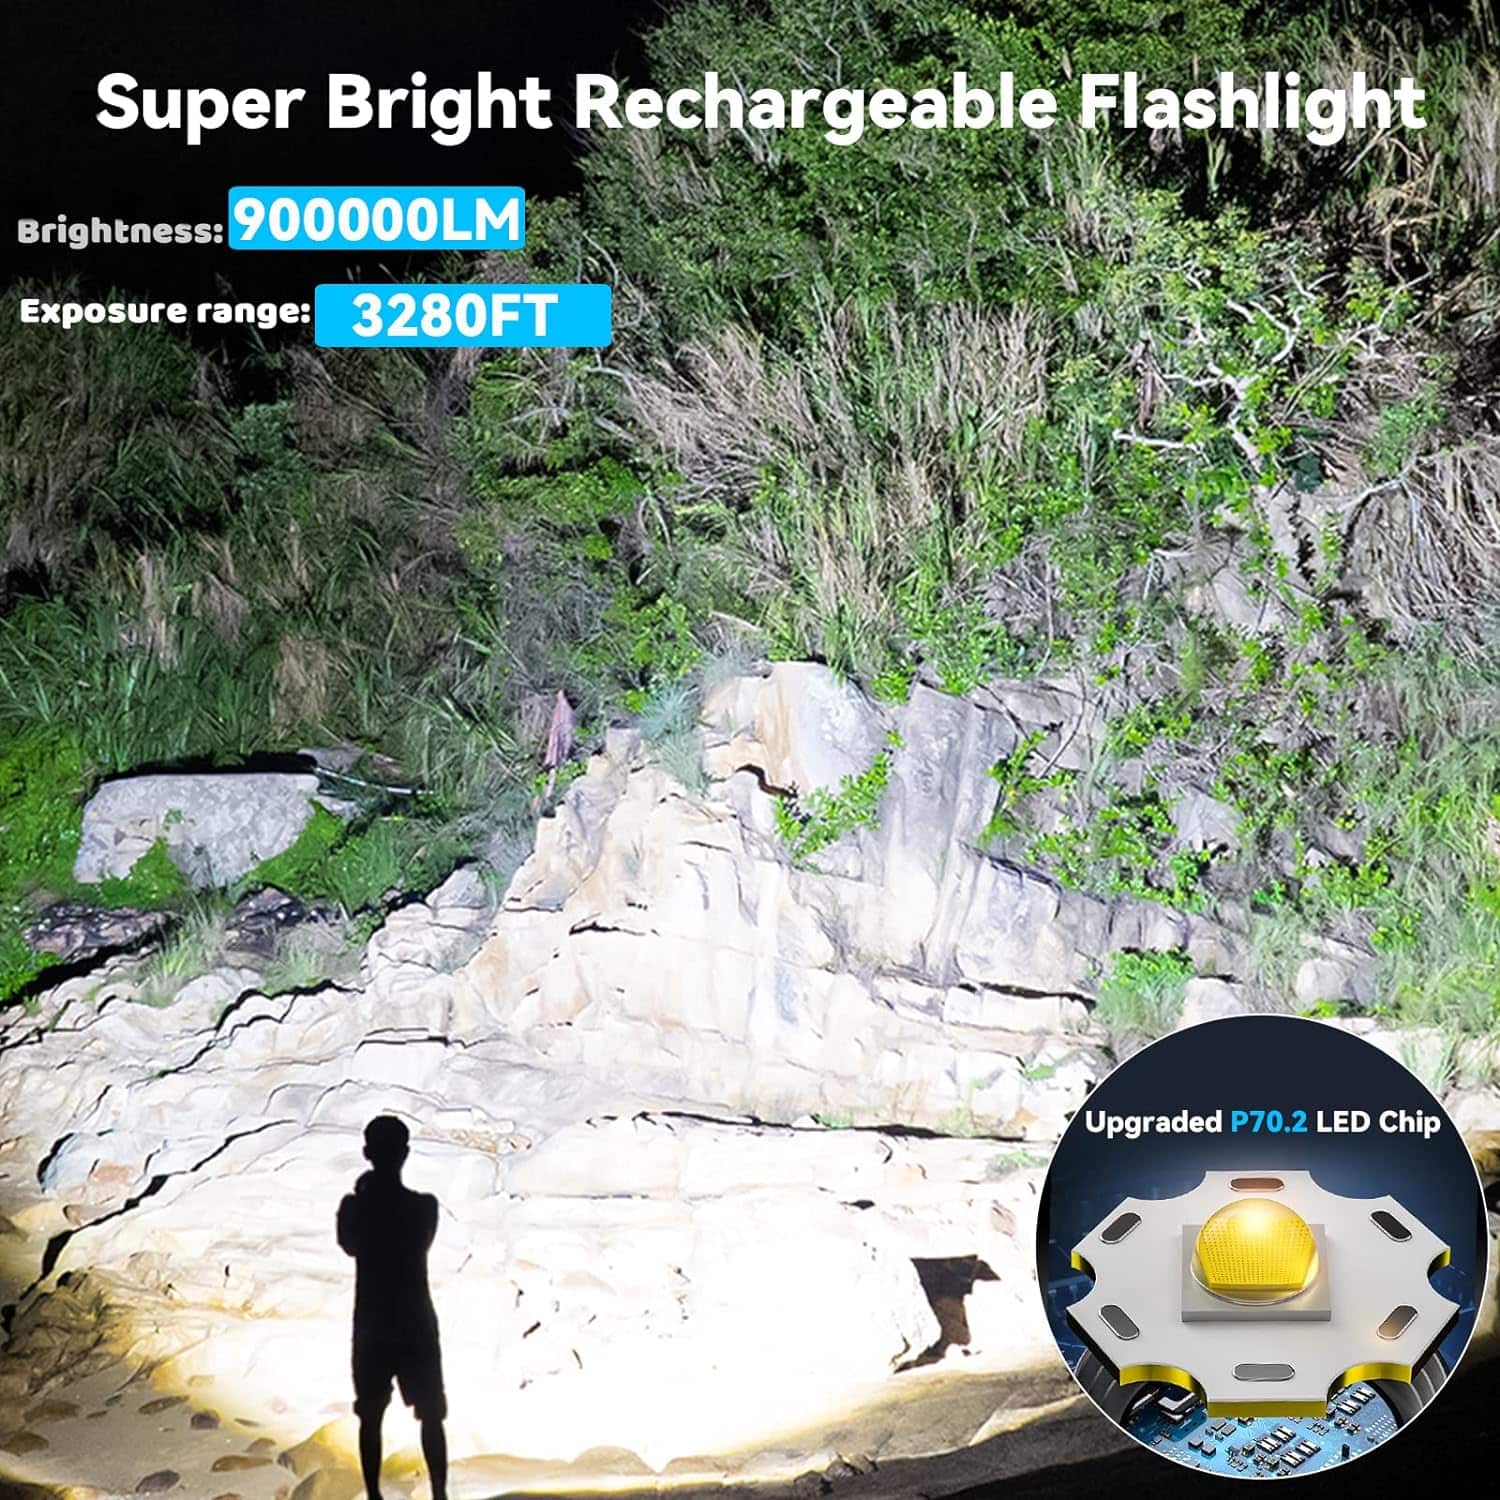 Flashlights Rechargeable, Super Bright 900000 Lumens Flashlights with USB Cable, Brightest LED Flashlight for Emergencies, IPX6 Waterproof 7 Light Modes Zoomable